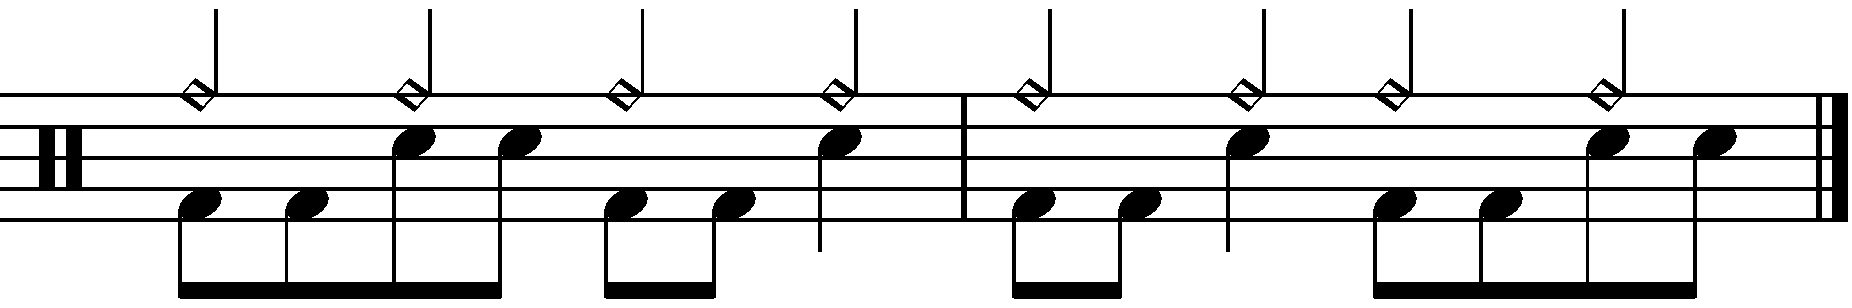 2 Bar Grooves - Example 2g